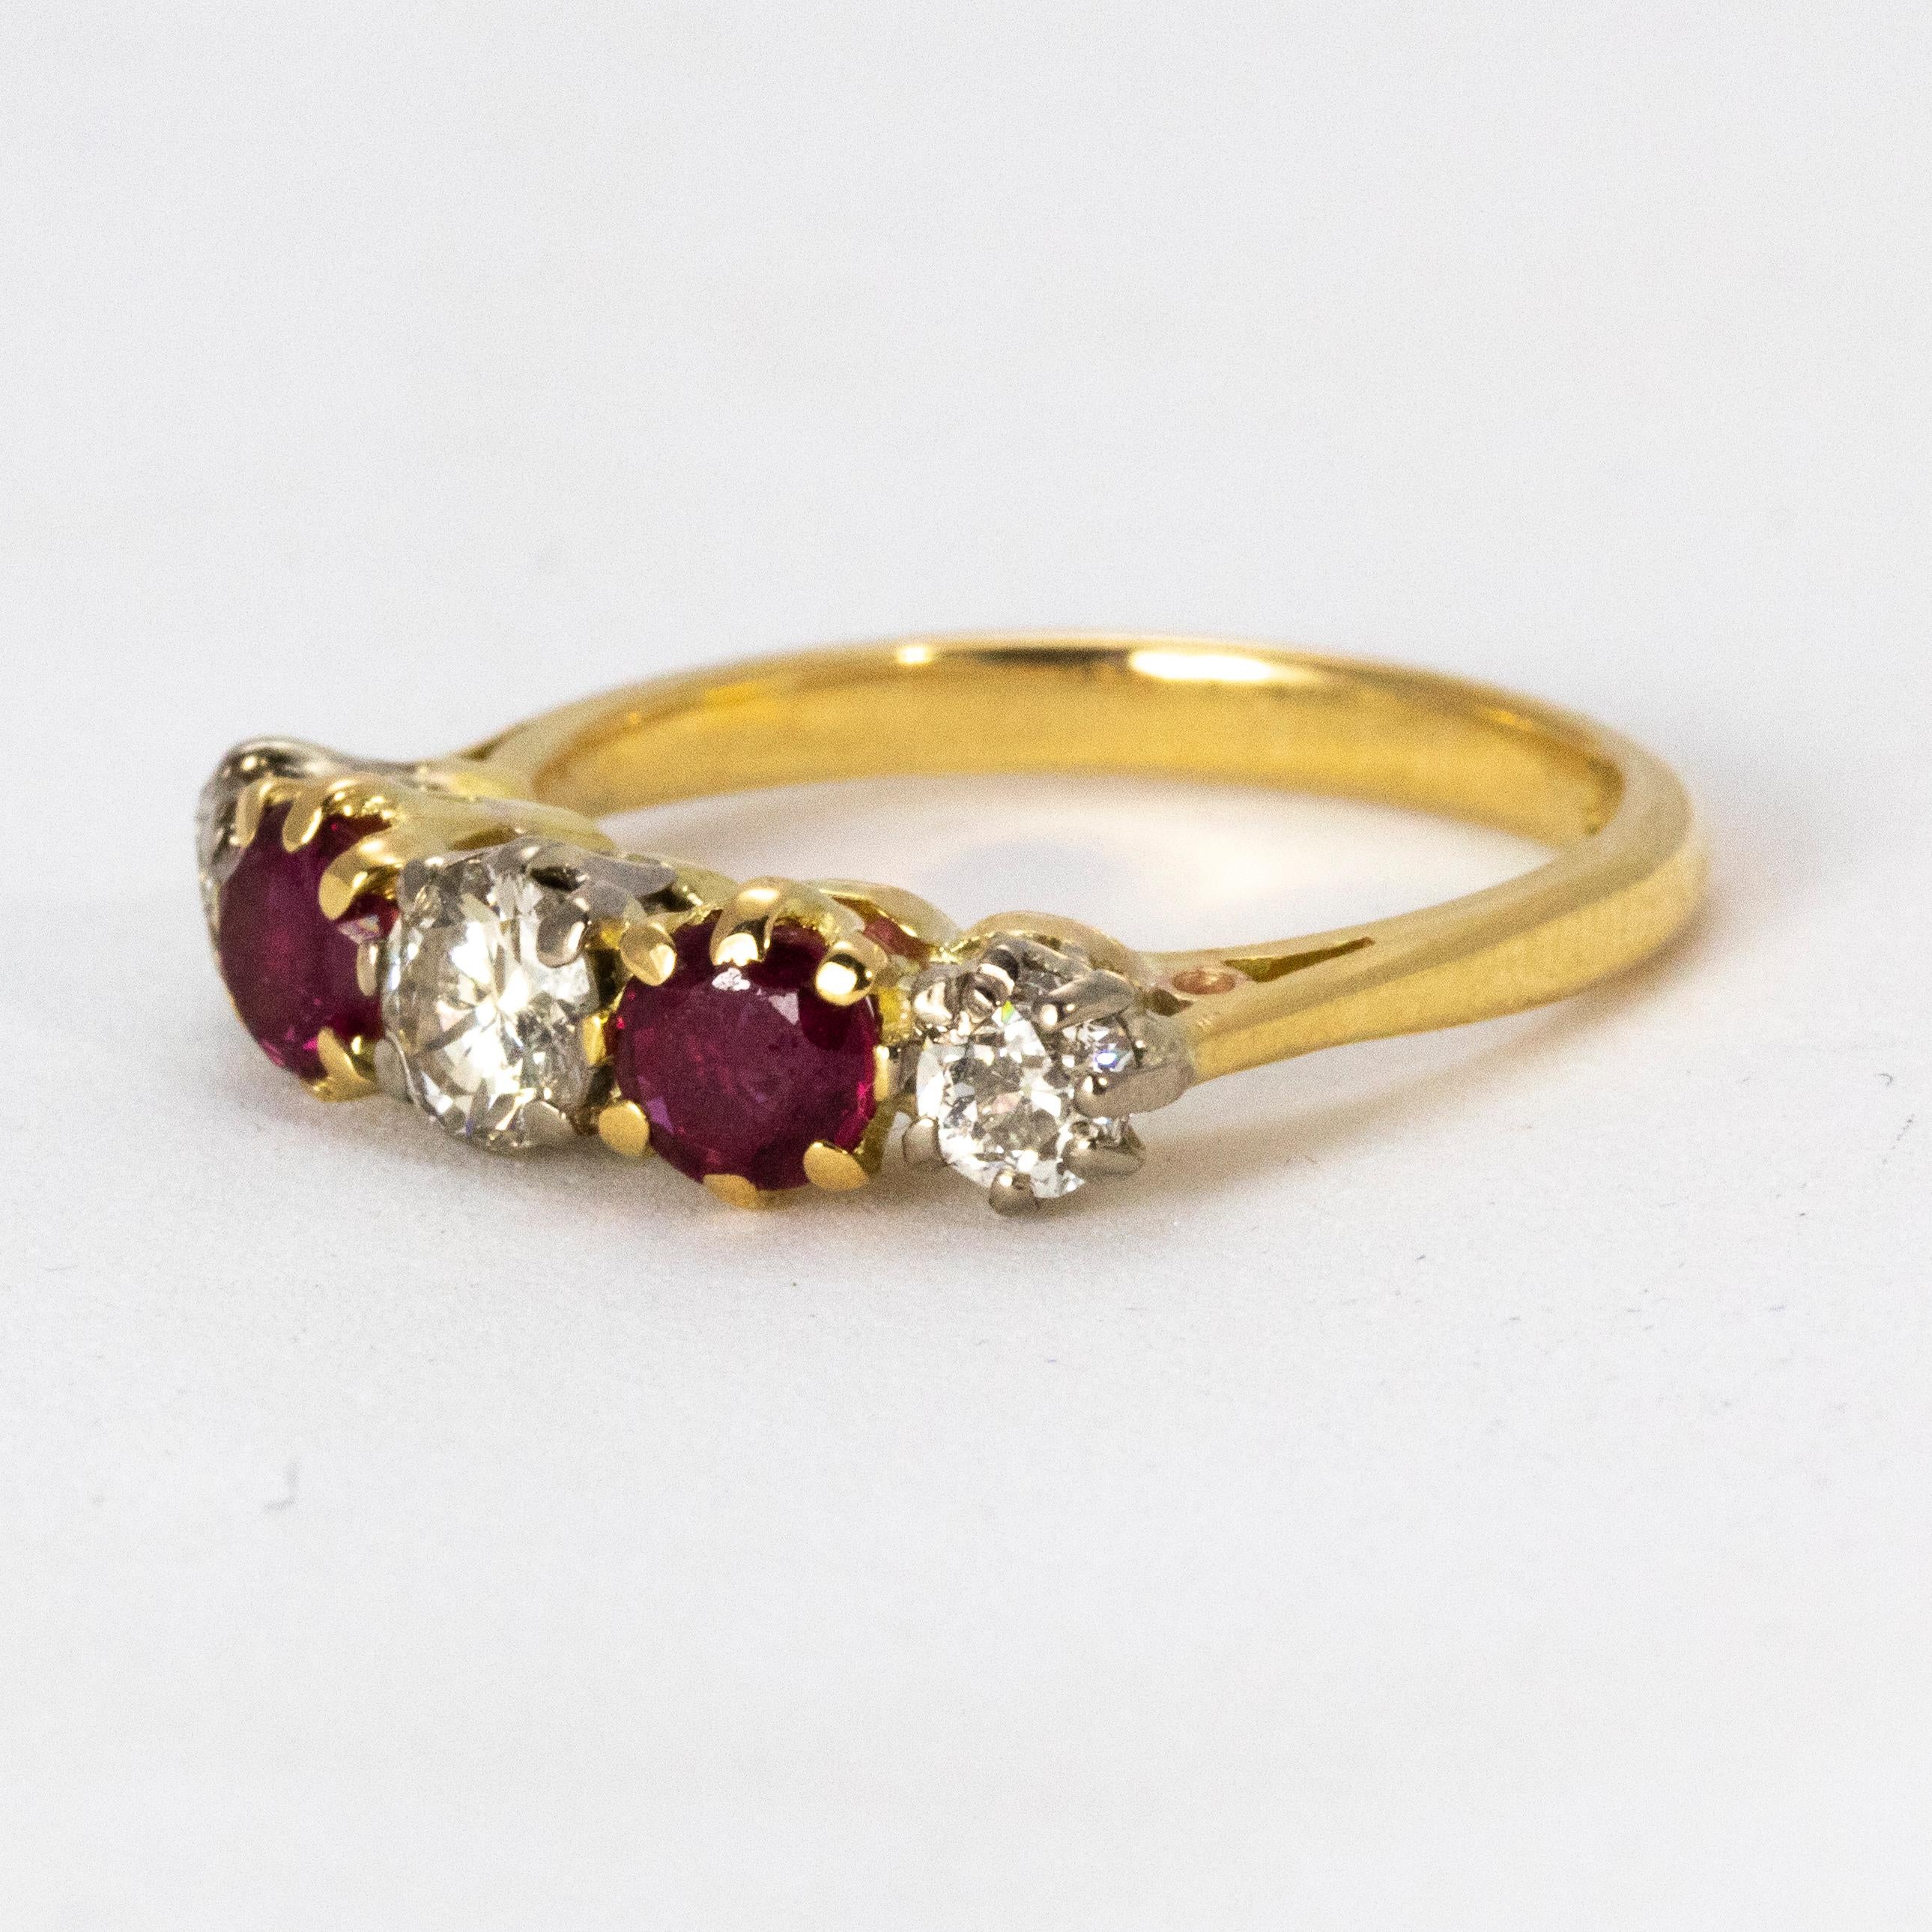 An Incredible Five Stone Ring from the Victorian period, boasting a pair of sublime rubies amongst a trio of bright diamonds. Total carat weight 1.25ct

Ring Size: L or 6